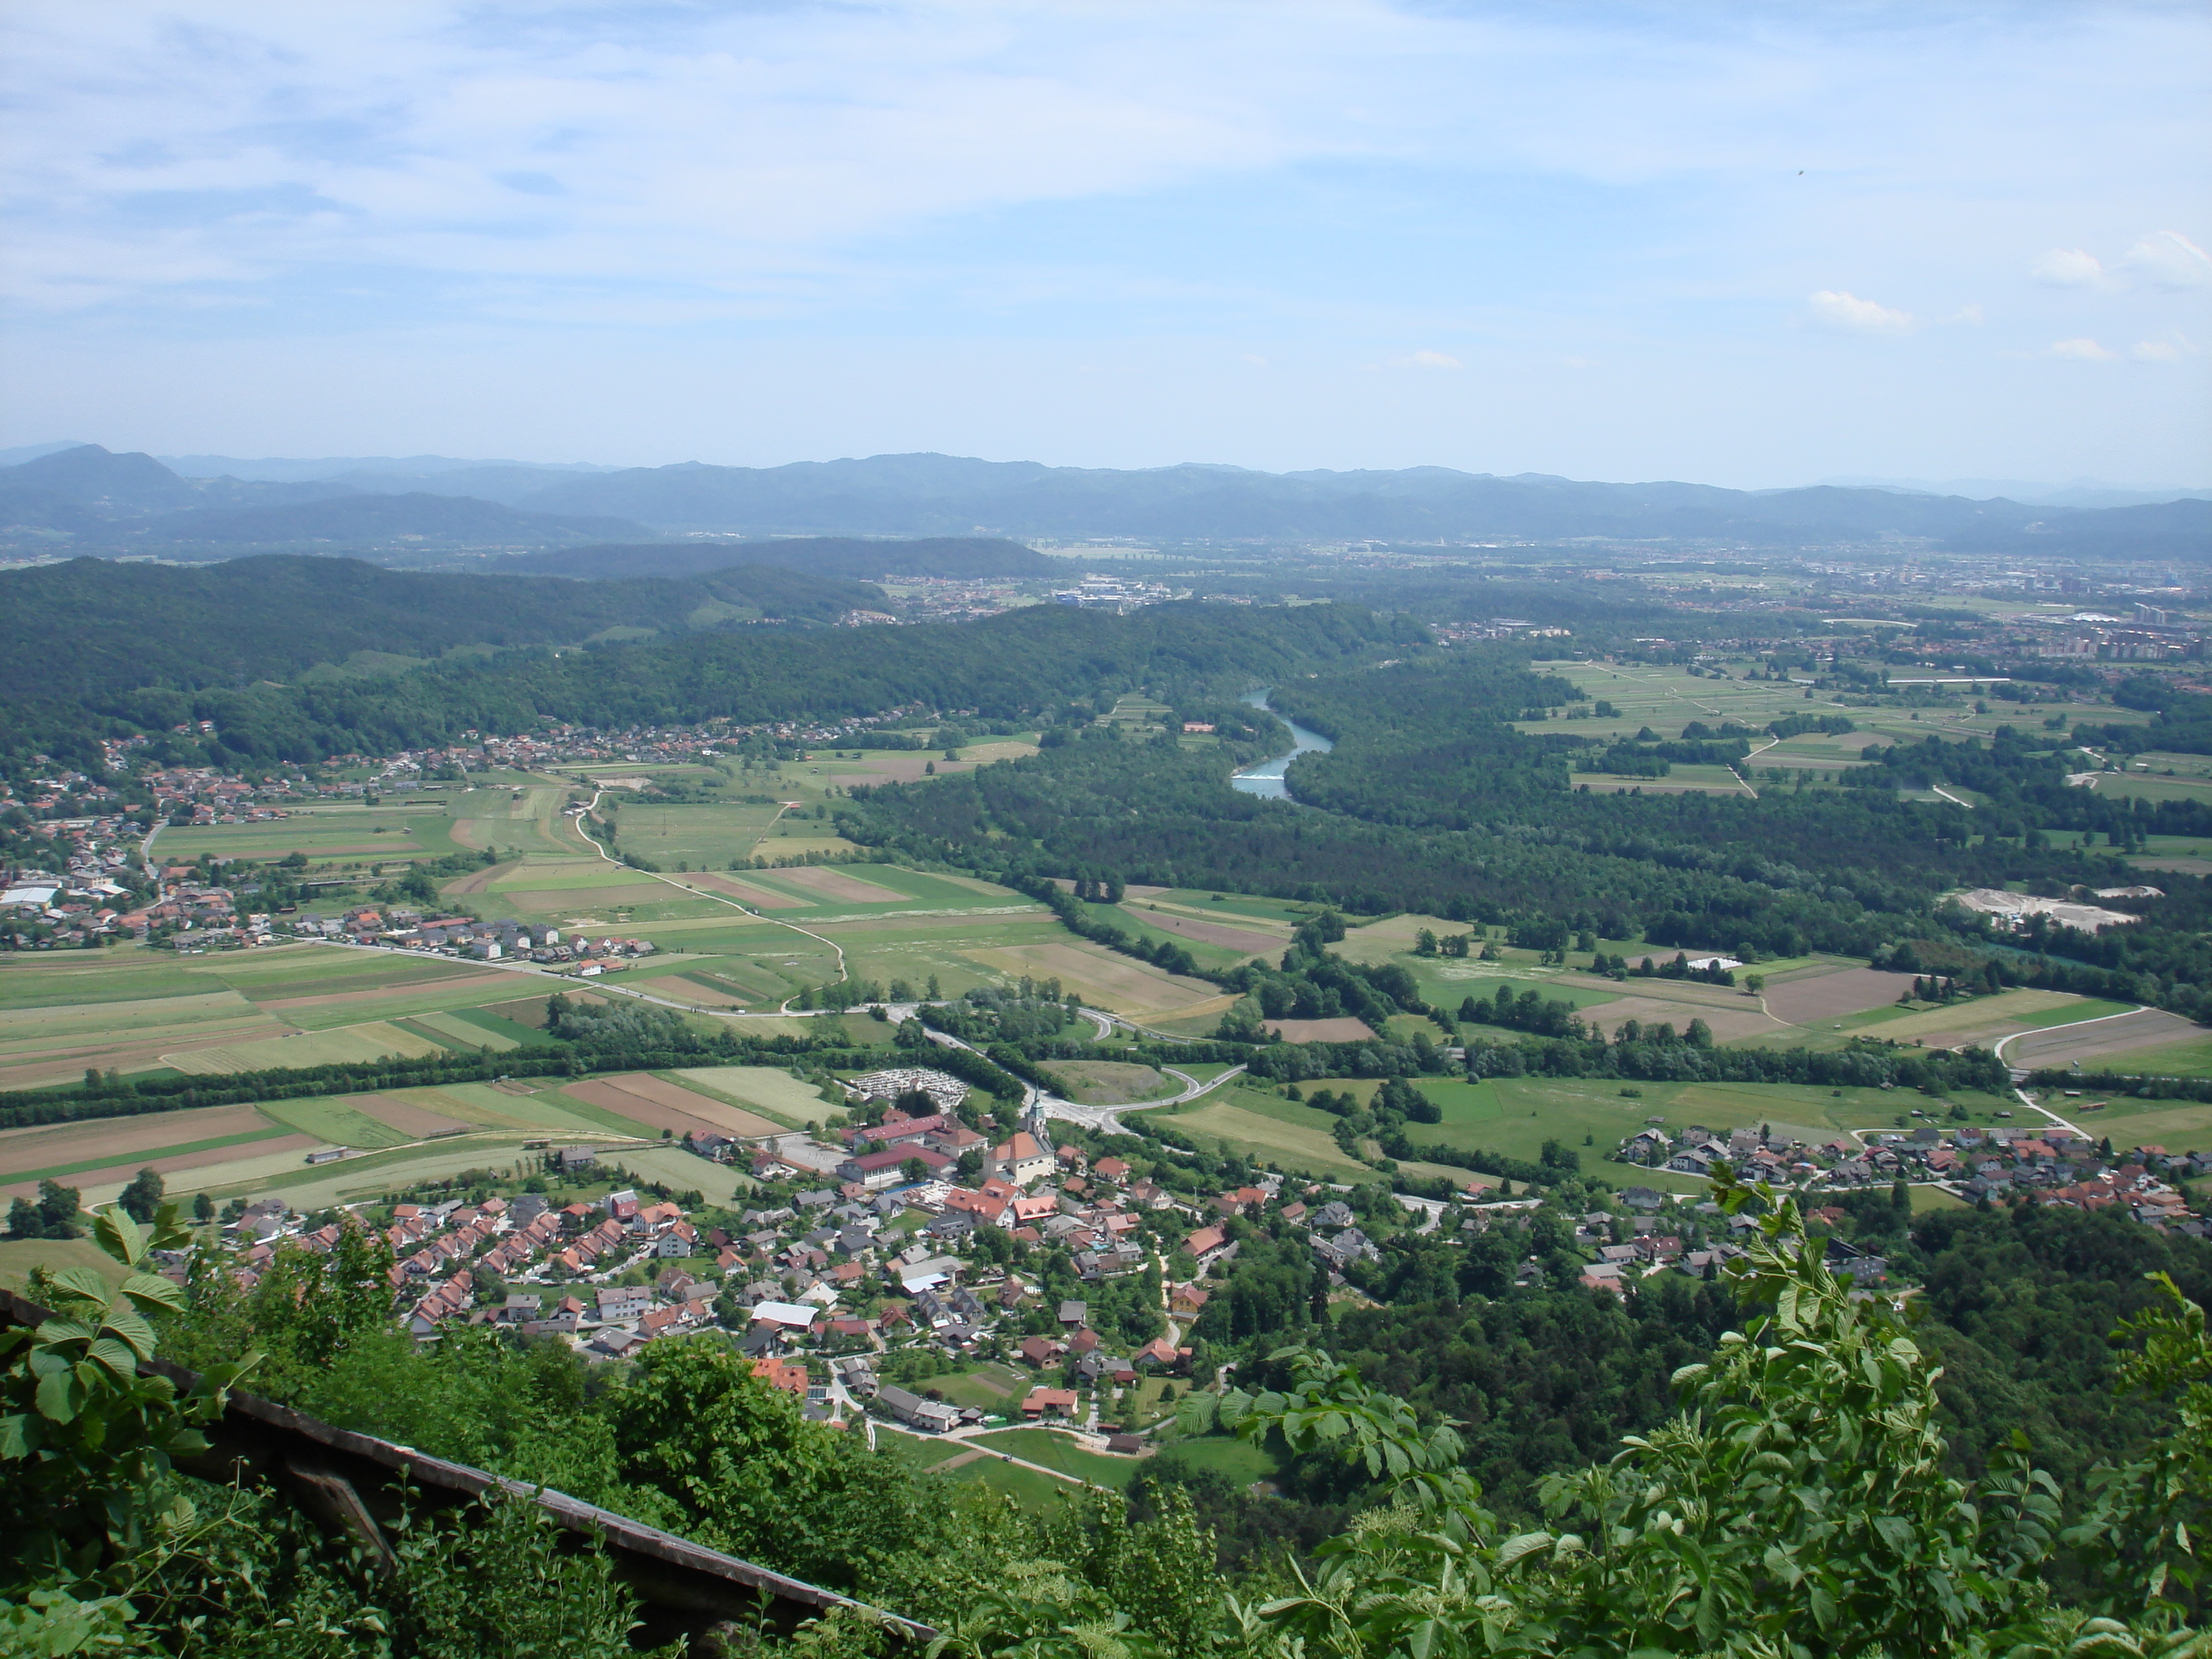 View from the top of Šmarne gore